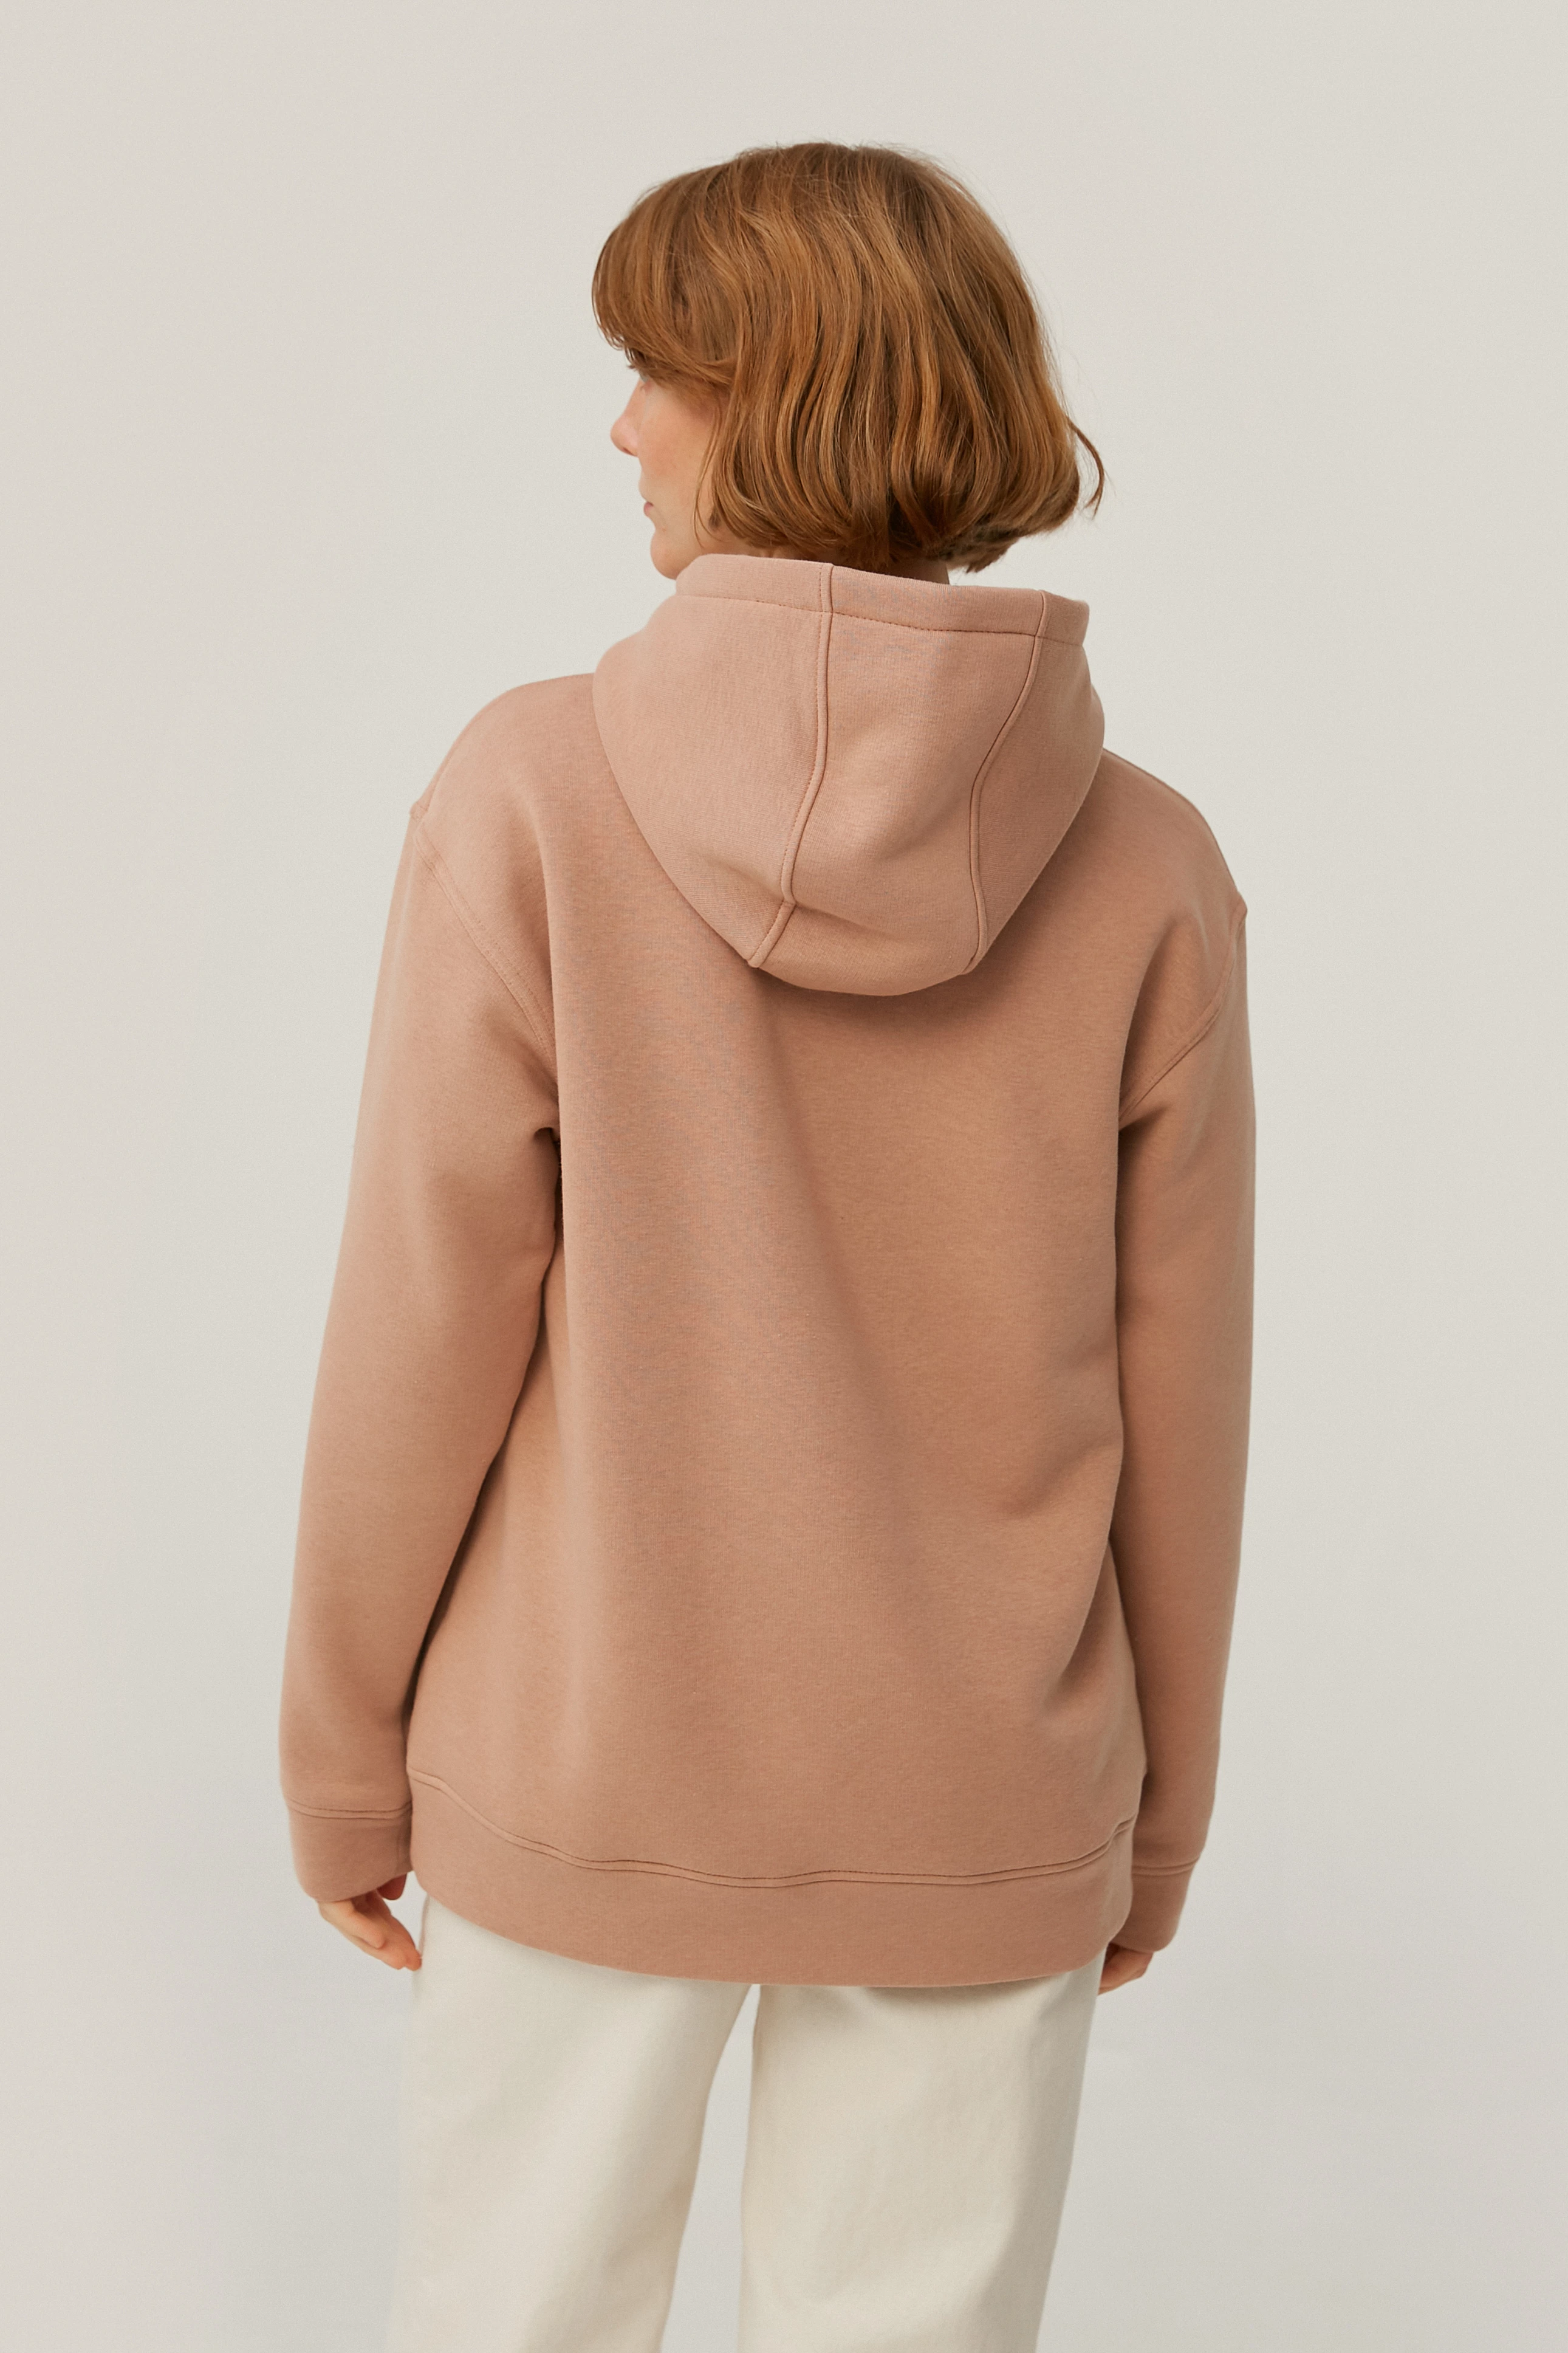 Beige jersey hoodie "Prosecco morning" with fleece, photo 1